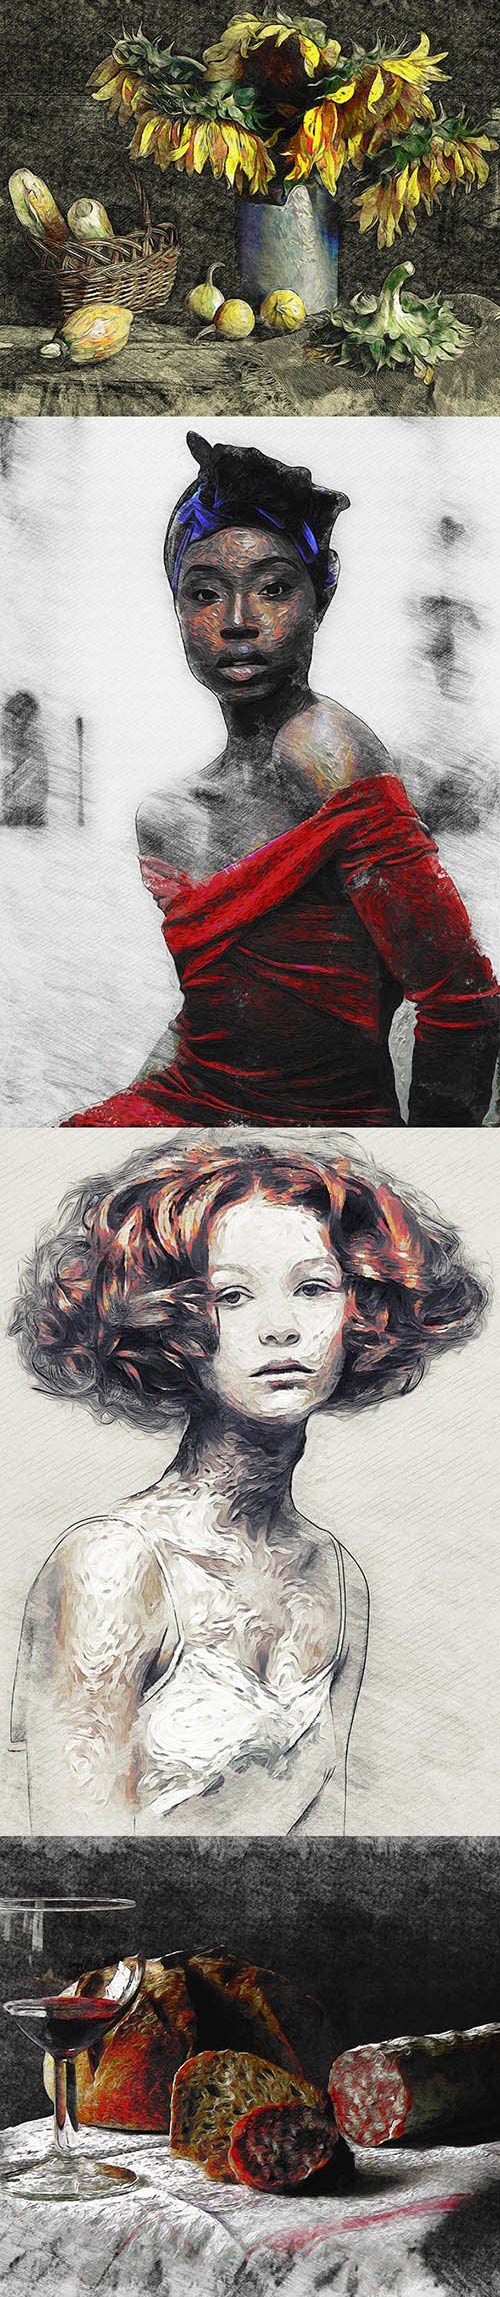 Mix Art - Sketch & Painting Photoshop Action 24802808